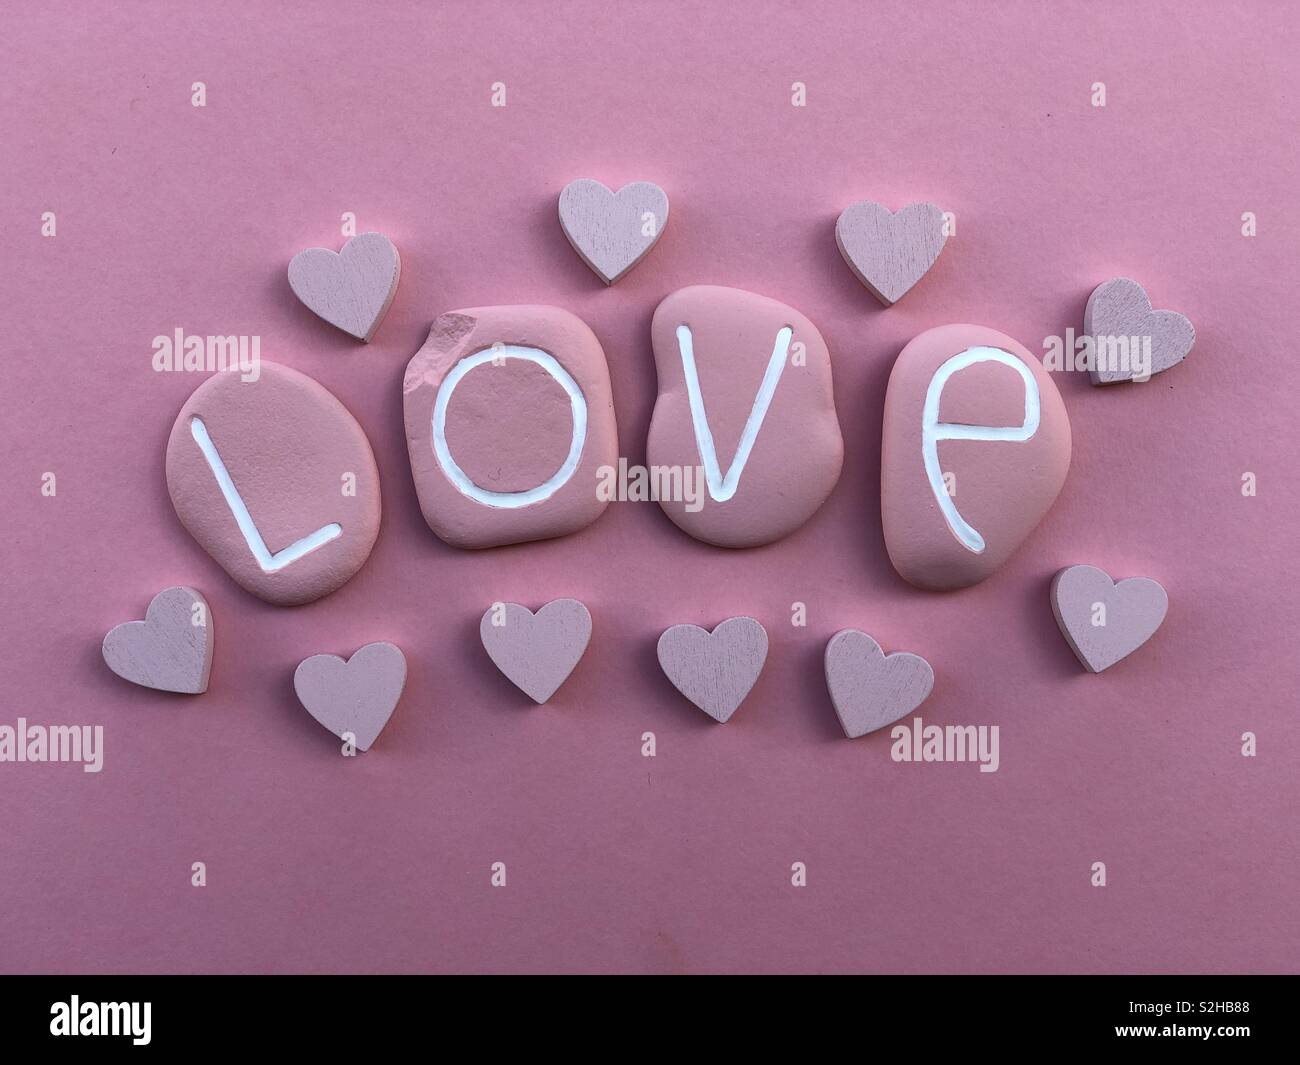 Love is pink Stock Photo